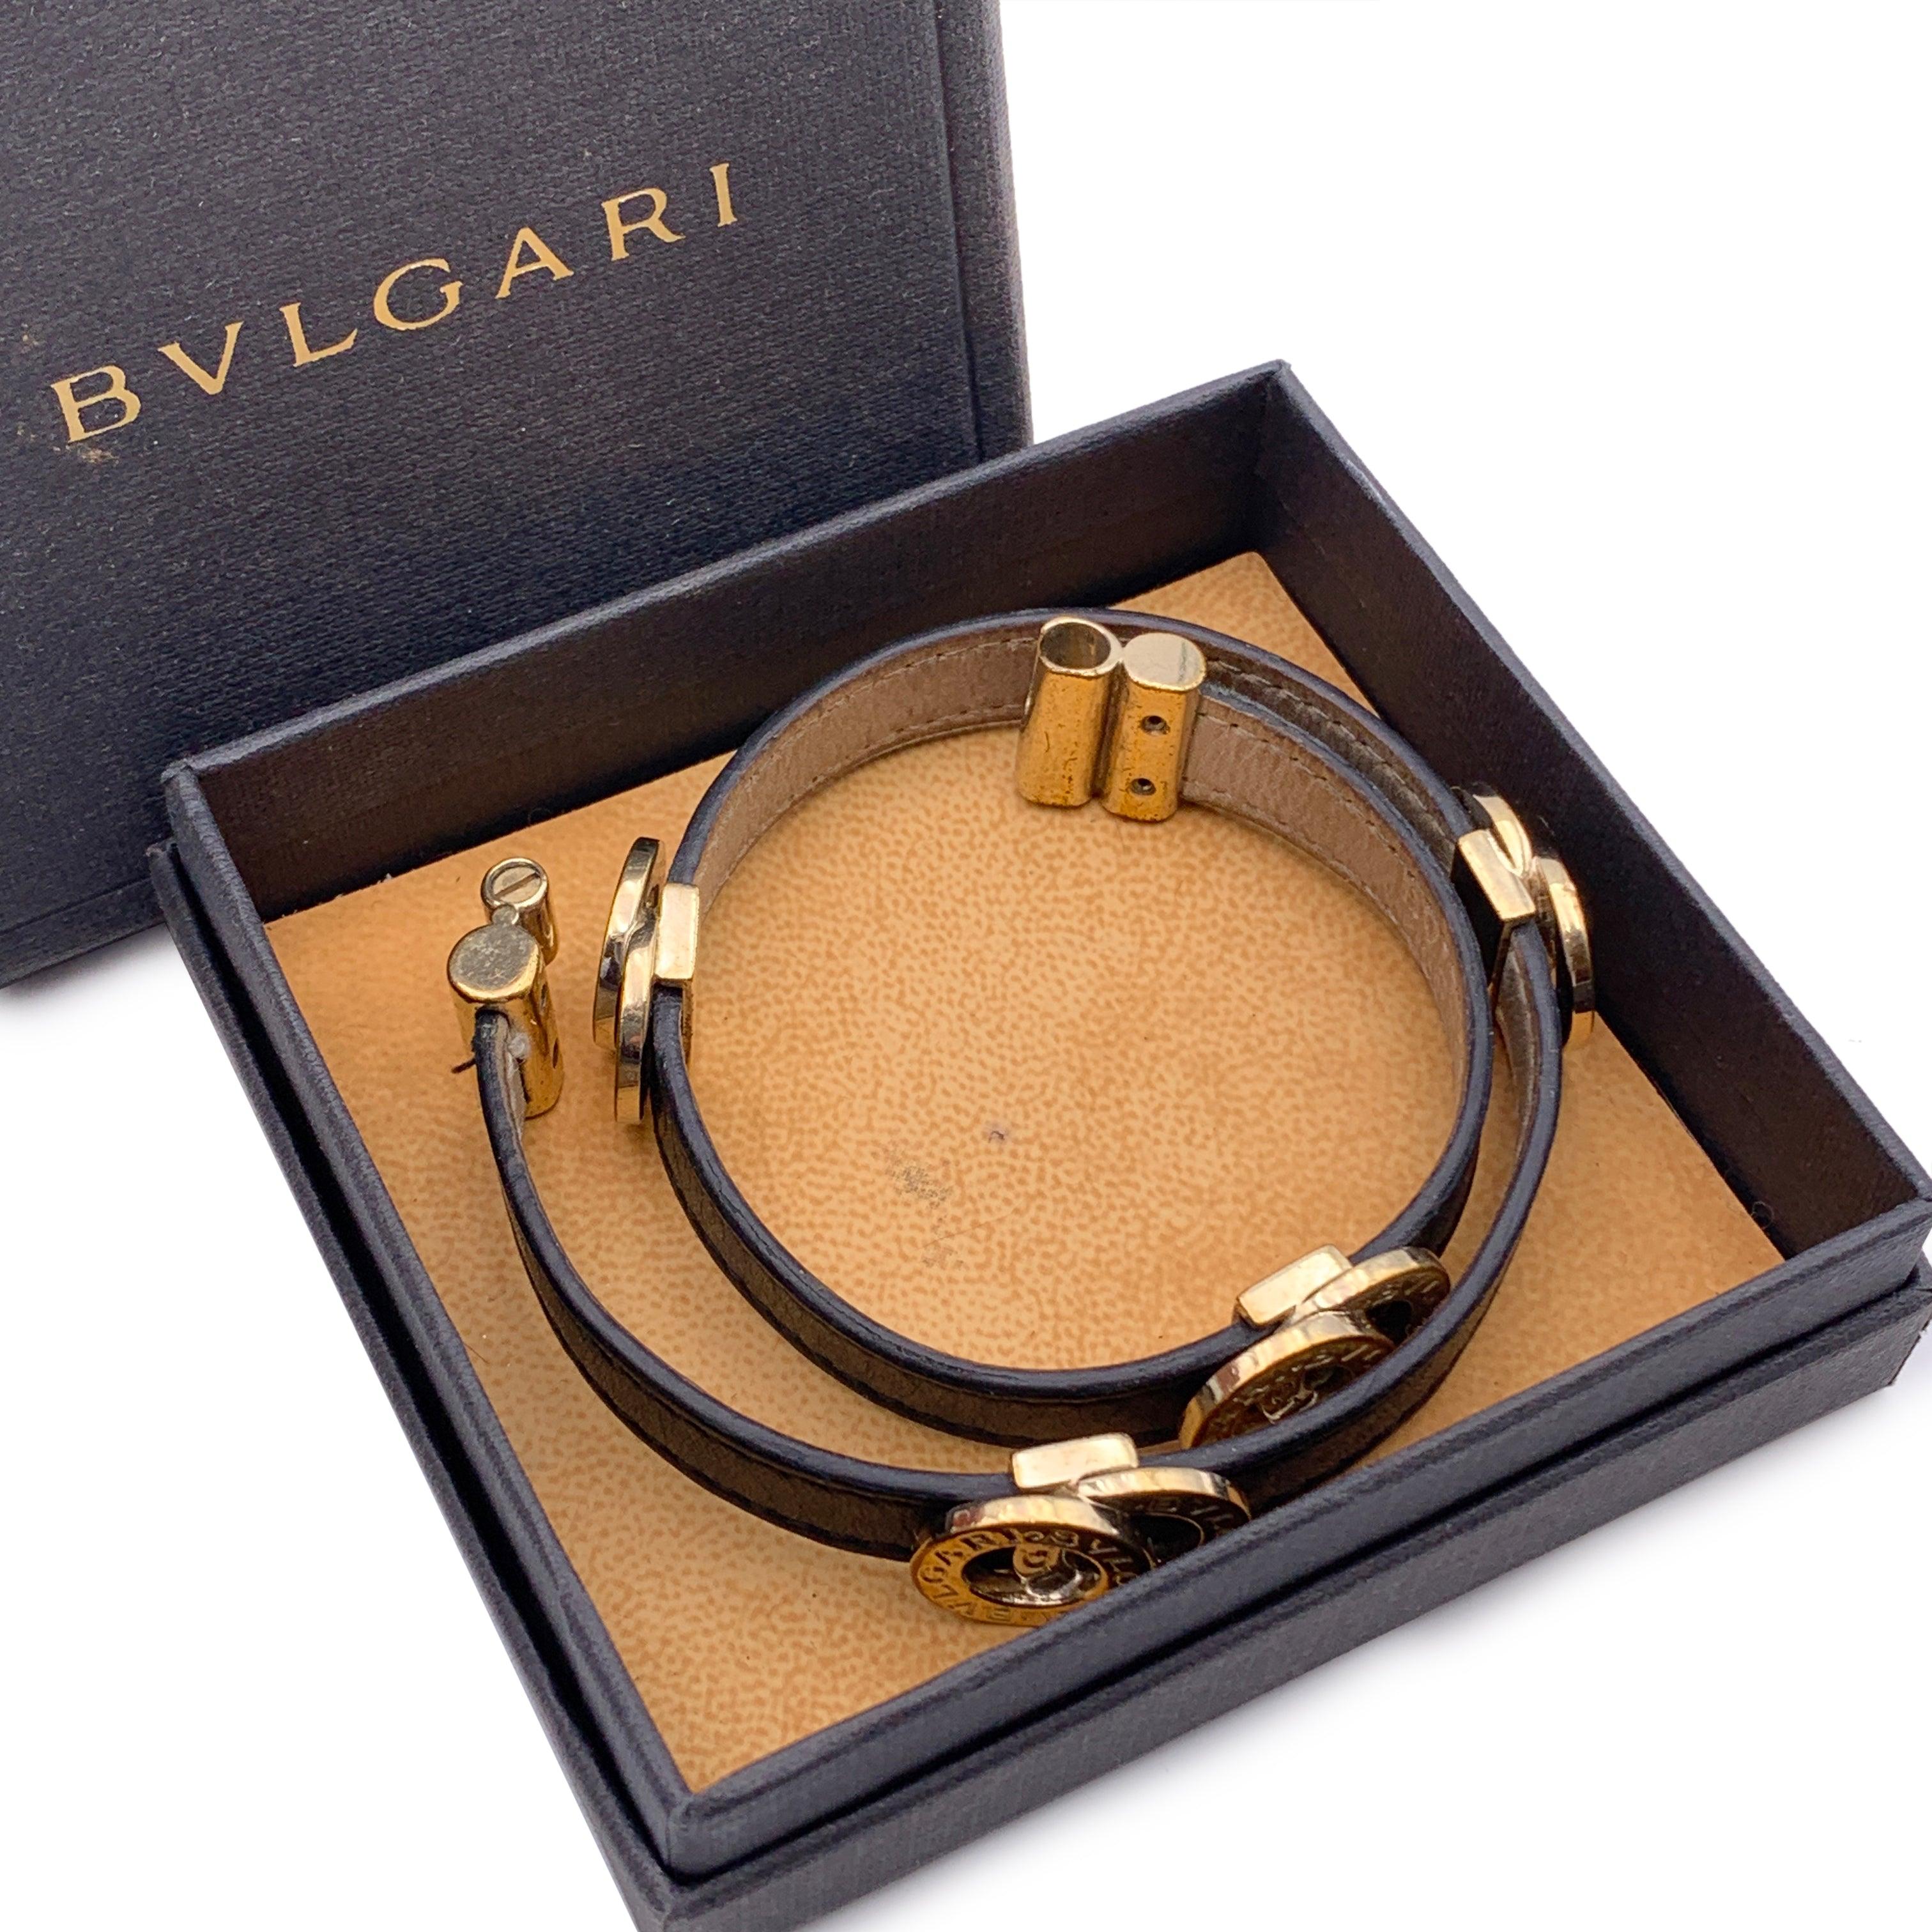 Bulgari Bvlgari Double coiled wrap bracelet in black leather with gold metal interlocking ring. Has been worn and is in excellent condition.BVlgari - made in Italy' engraved inside. Serial number engraved on the back. Total lenght: 14.5 inches -